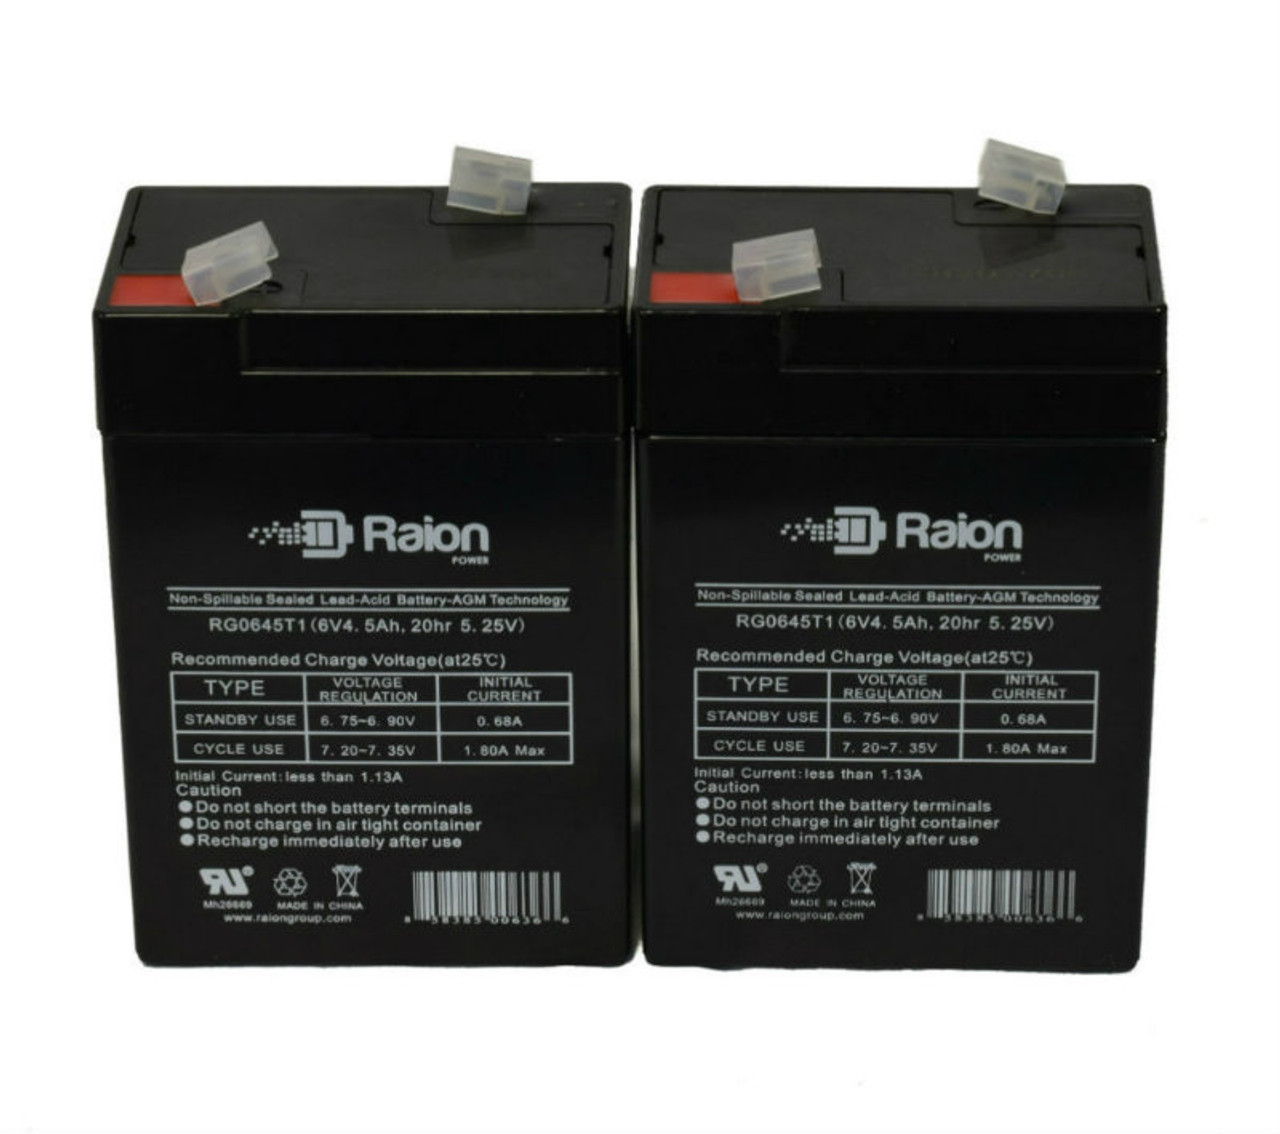 Raion Power RG0645T1 6V 4.5Ah Replacement Medical Equipment Battery for Nellcor NPB 290 - 2 Pack